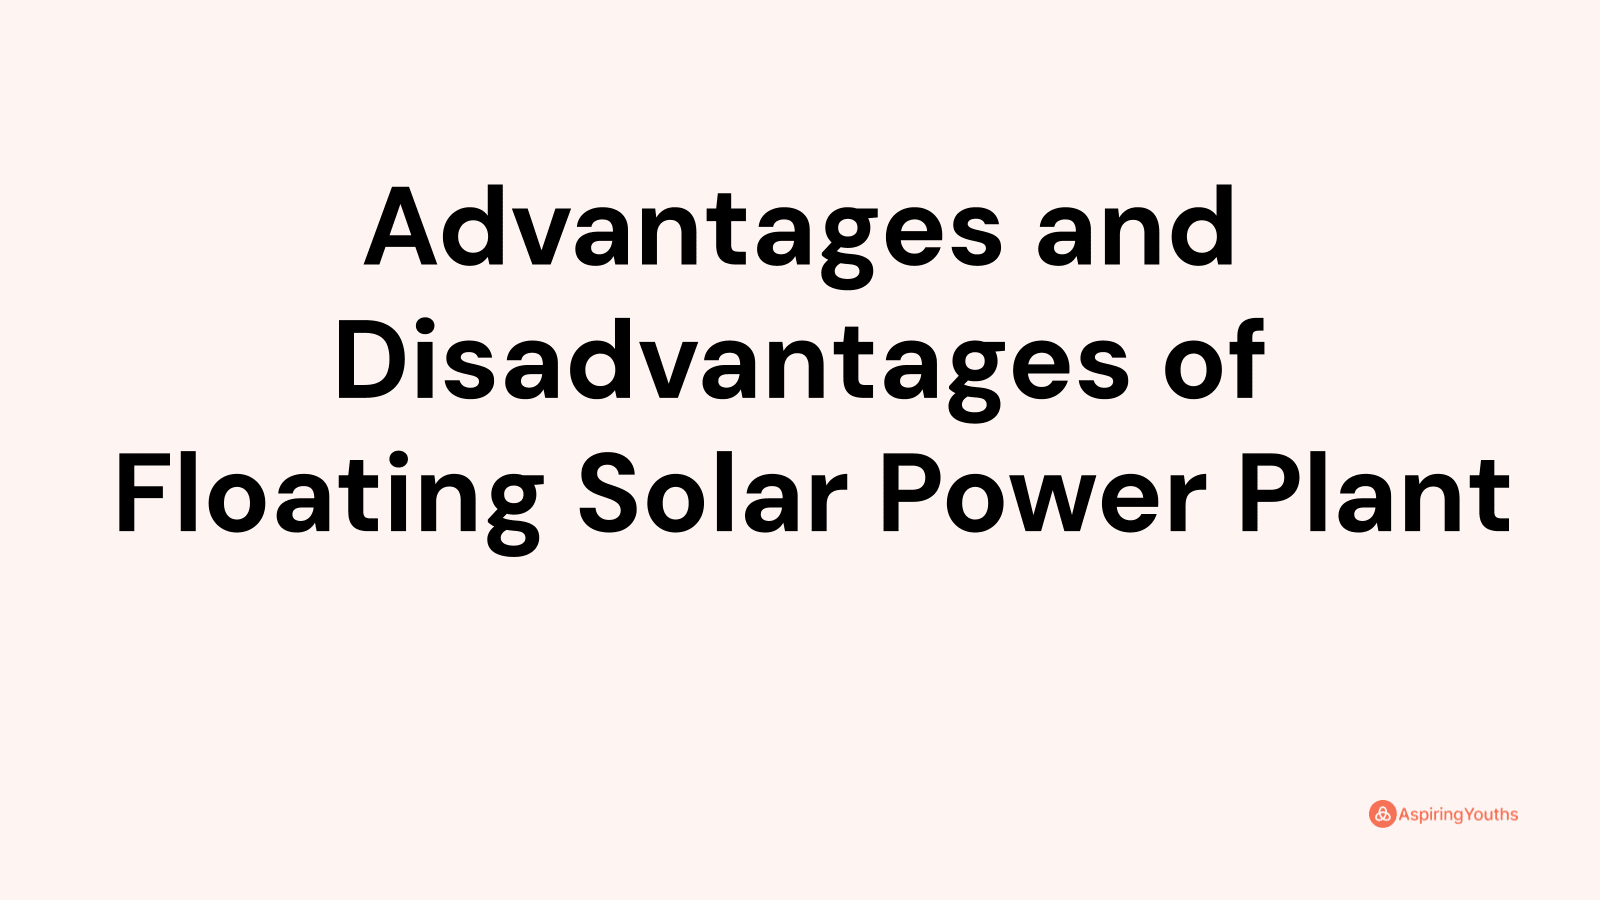 Advantages and disadvantages of Floating Solar Power Plant